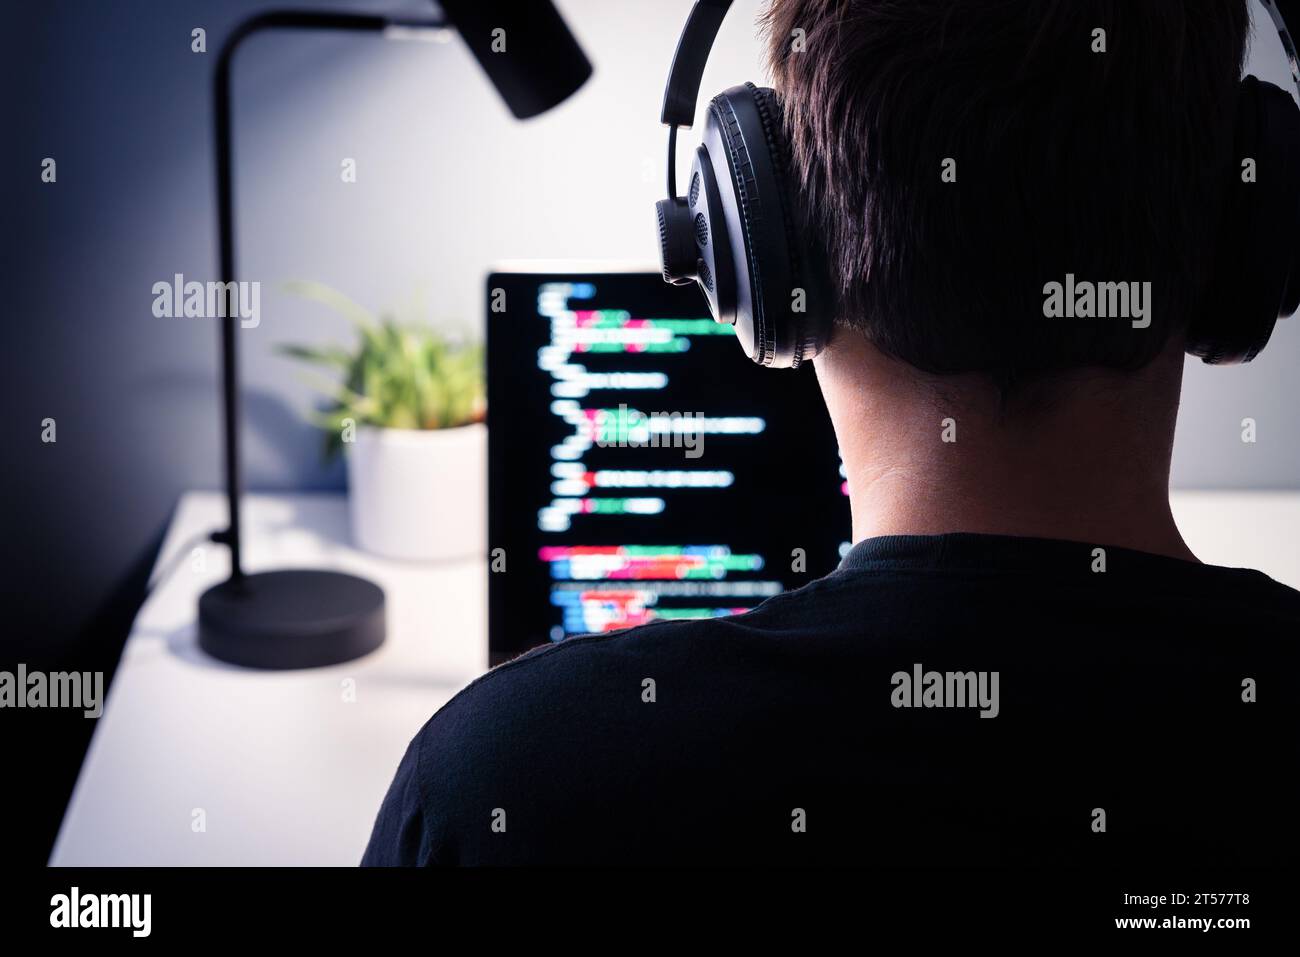 Hacker or code developer with laptop. Malware, game or website developing. Cyber criminal, programmer, engineer or coder. Fraud software or privacy. Stock Photo